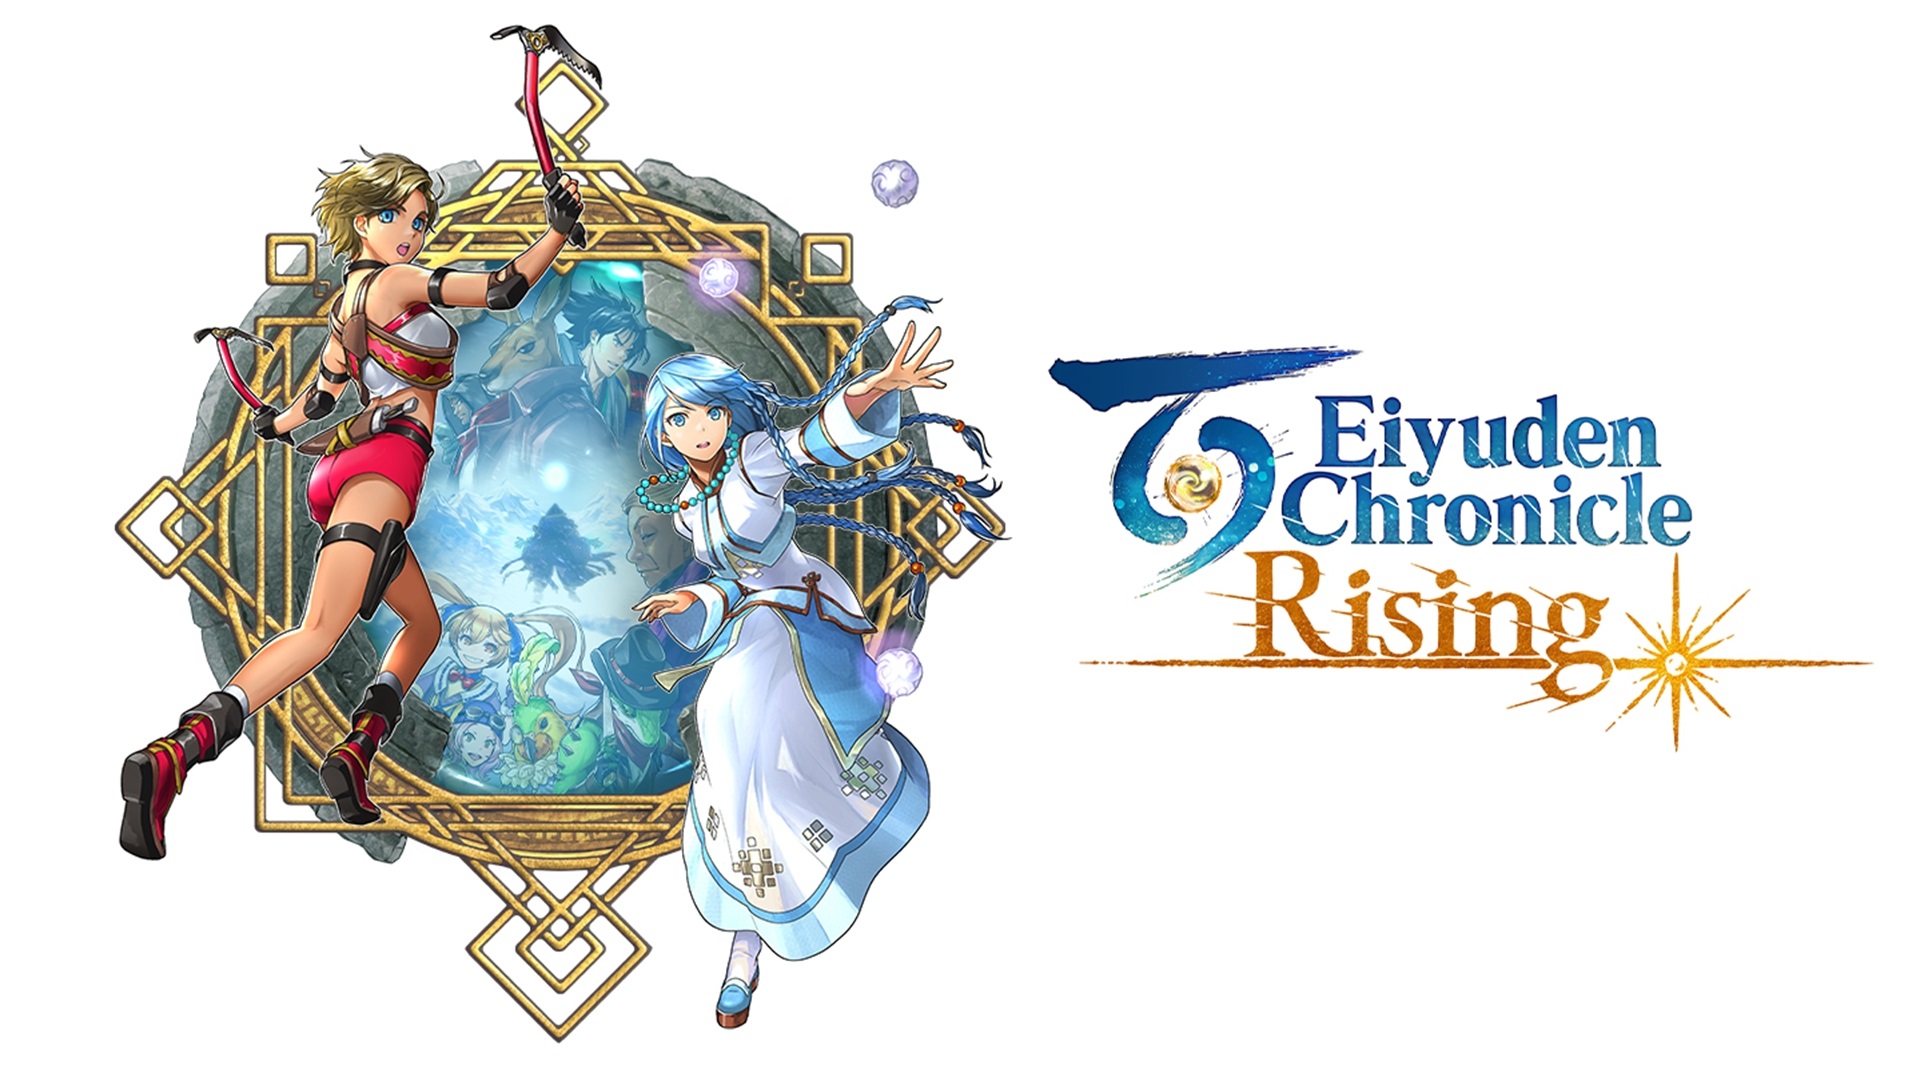 Eiyuden Chronicle: Rising release date set for May 2022